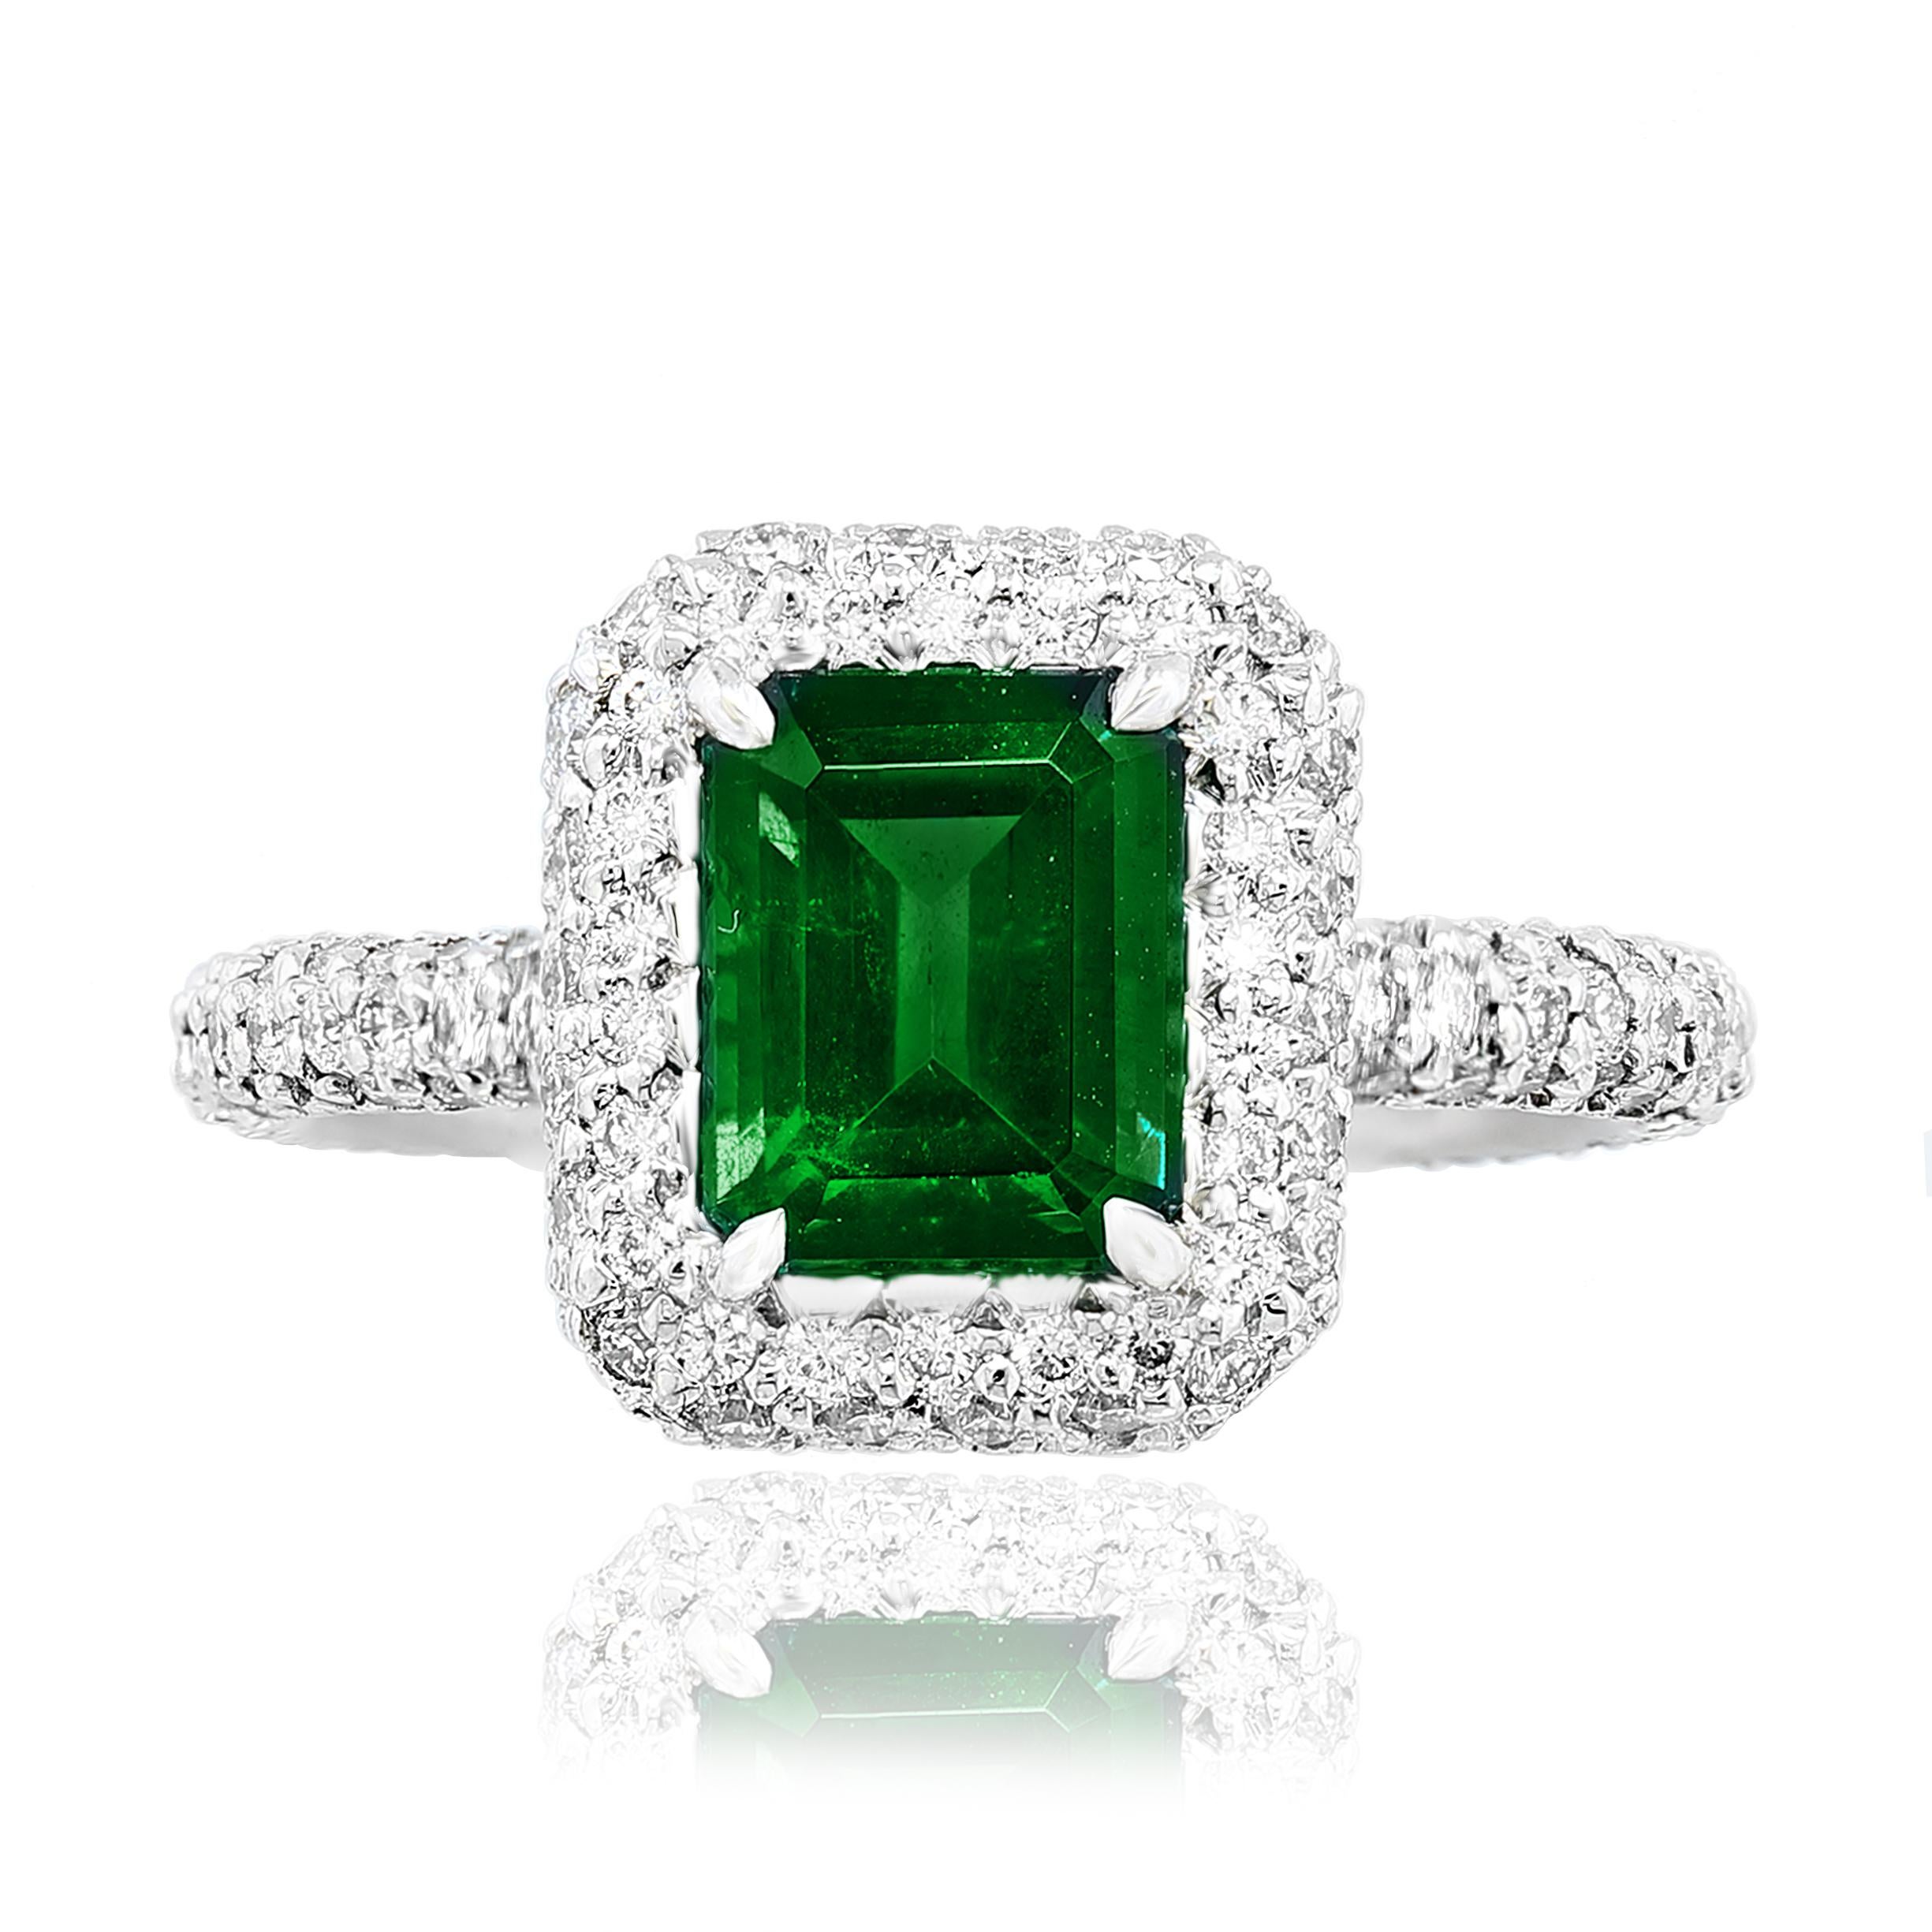 Showcasing a 1.60-carat emerald cut emerald set in a polished platinum mounting accented with diamonds. Accent diamonds are set in a micro pave setting all around the center stone and halfway on the side weighing 11.49 carats total.  Size 6.5 US